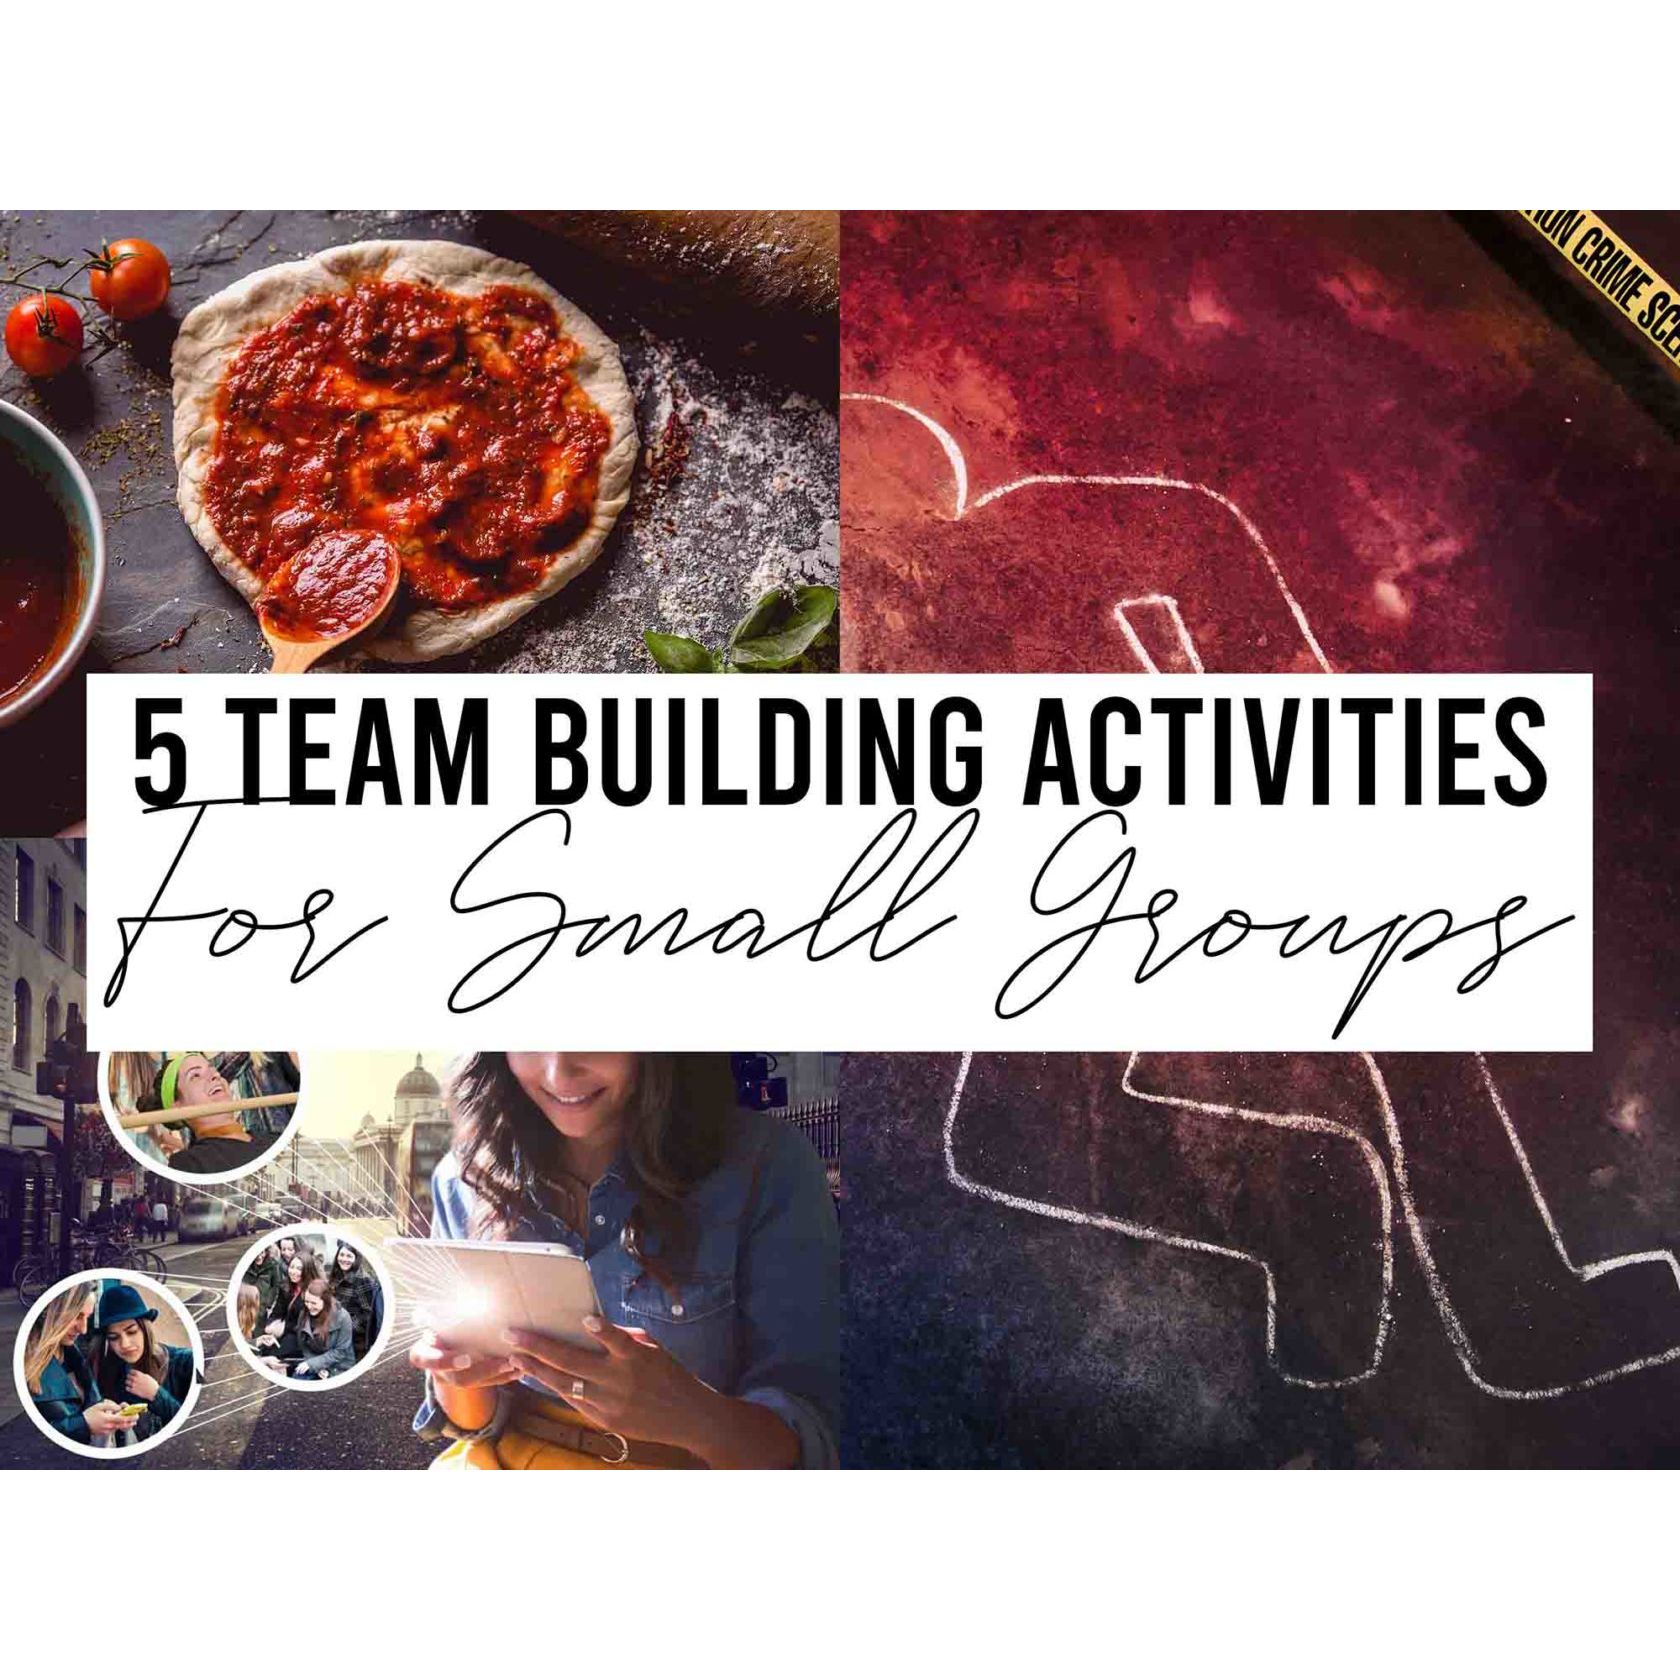 5 Team Building Activities for Small Groups